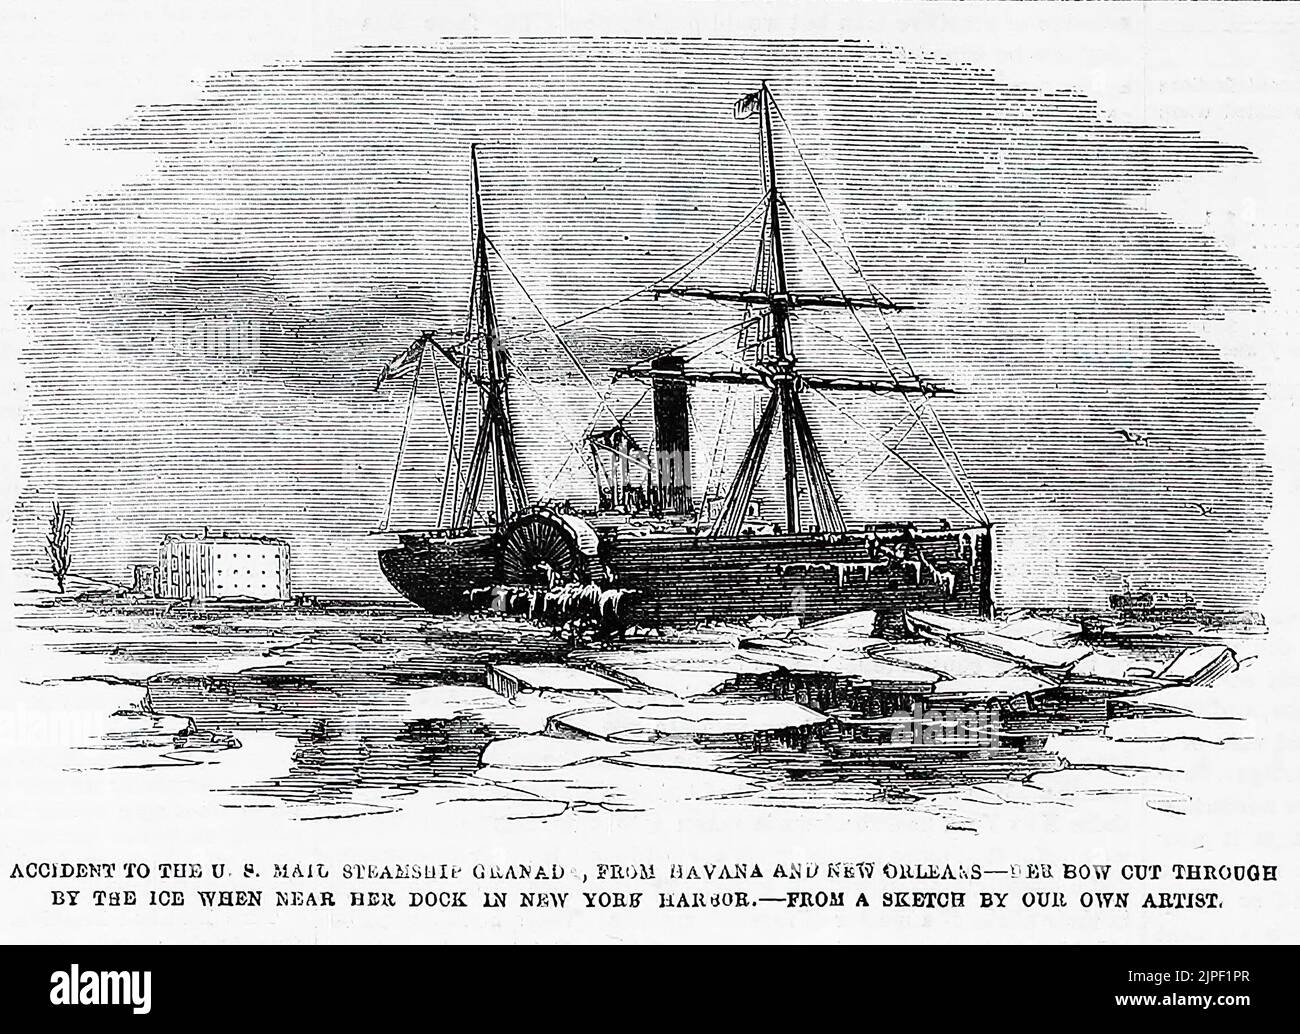 Accident to the U. S. Mail Steamship Granada, from Havana and New Orleans - Her bow cut through by the ice when near her dock in New York Harbor (1860). 19th century illustration from Frank Leslie's Illustrated Newspaper Stock Photo